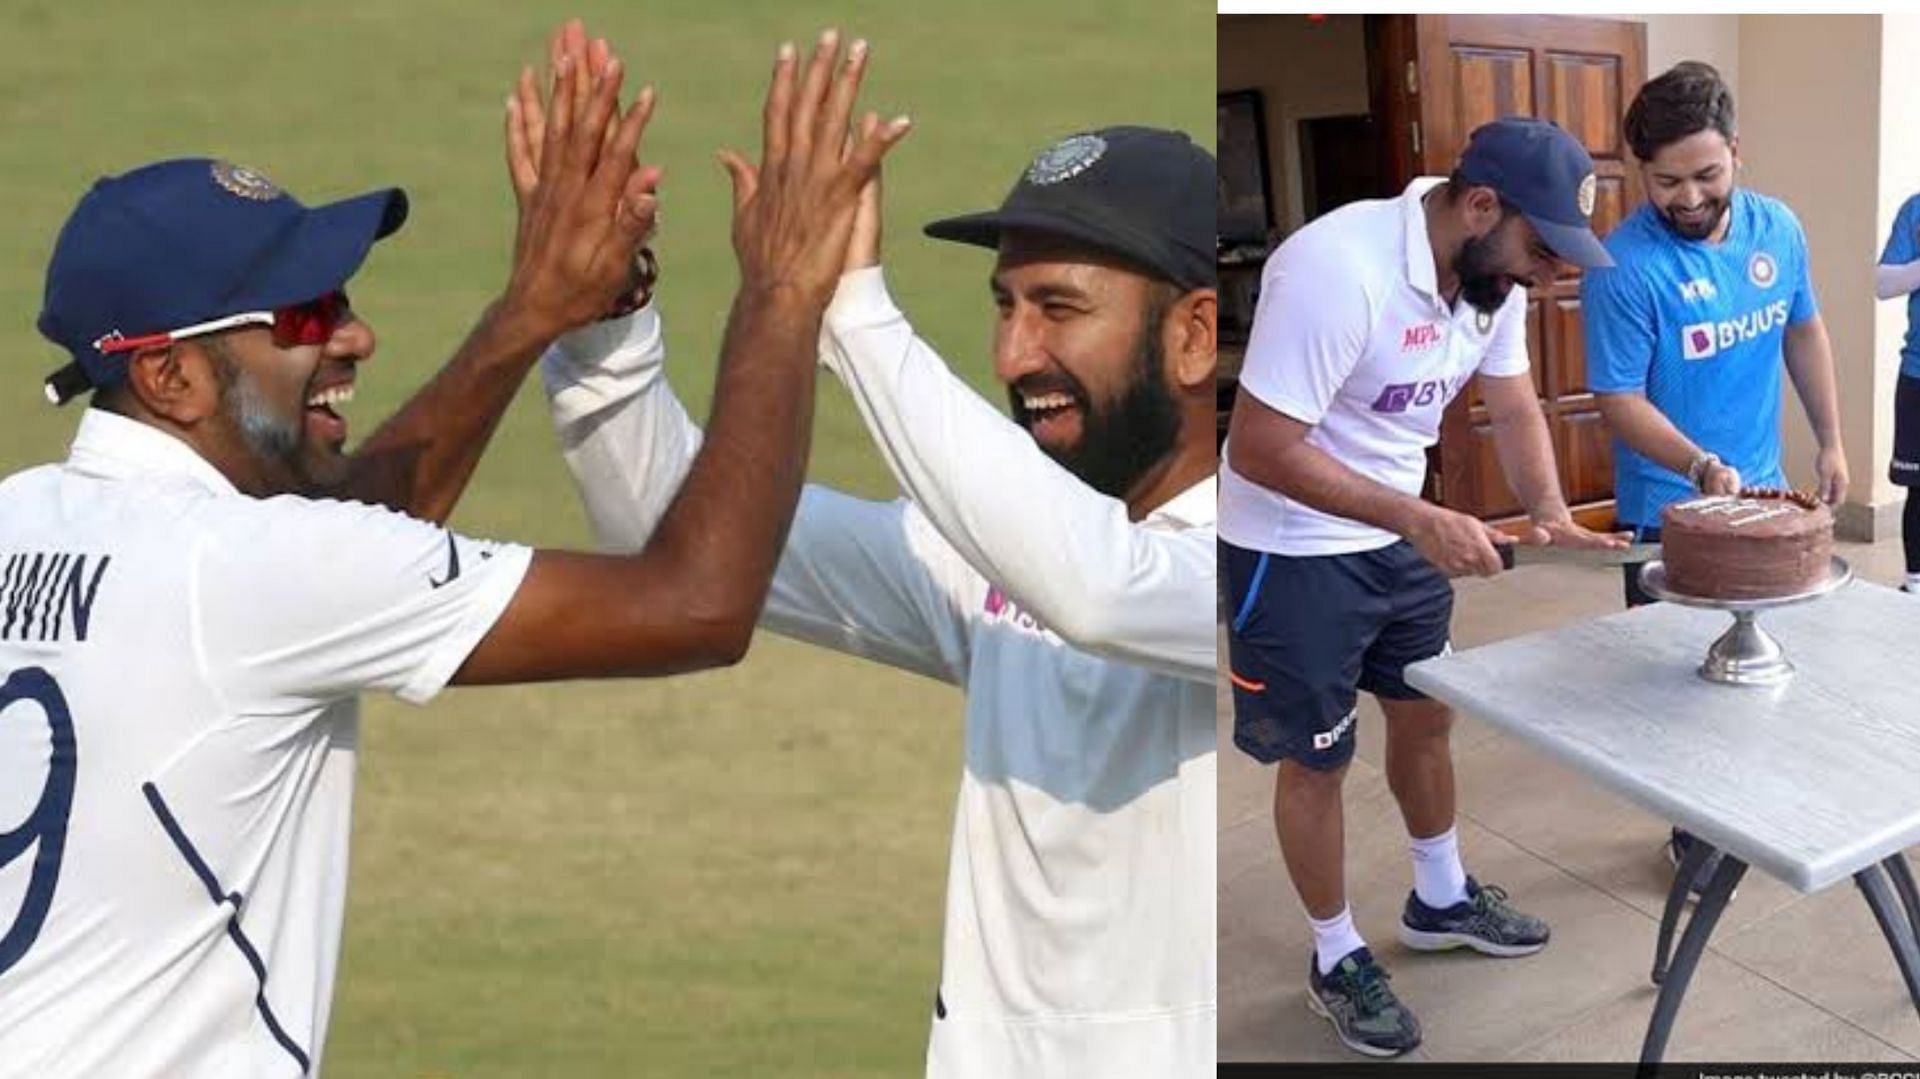 Indian cricketers have engaged in some fun banters on Twitter